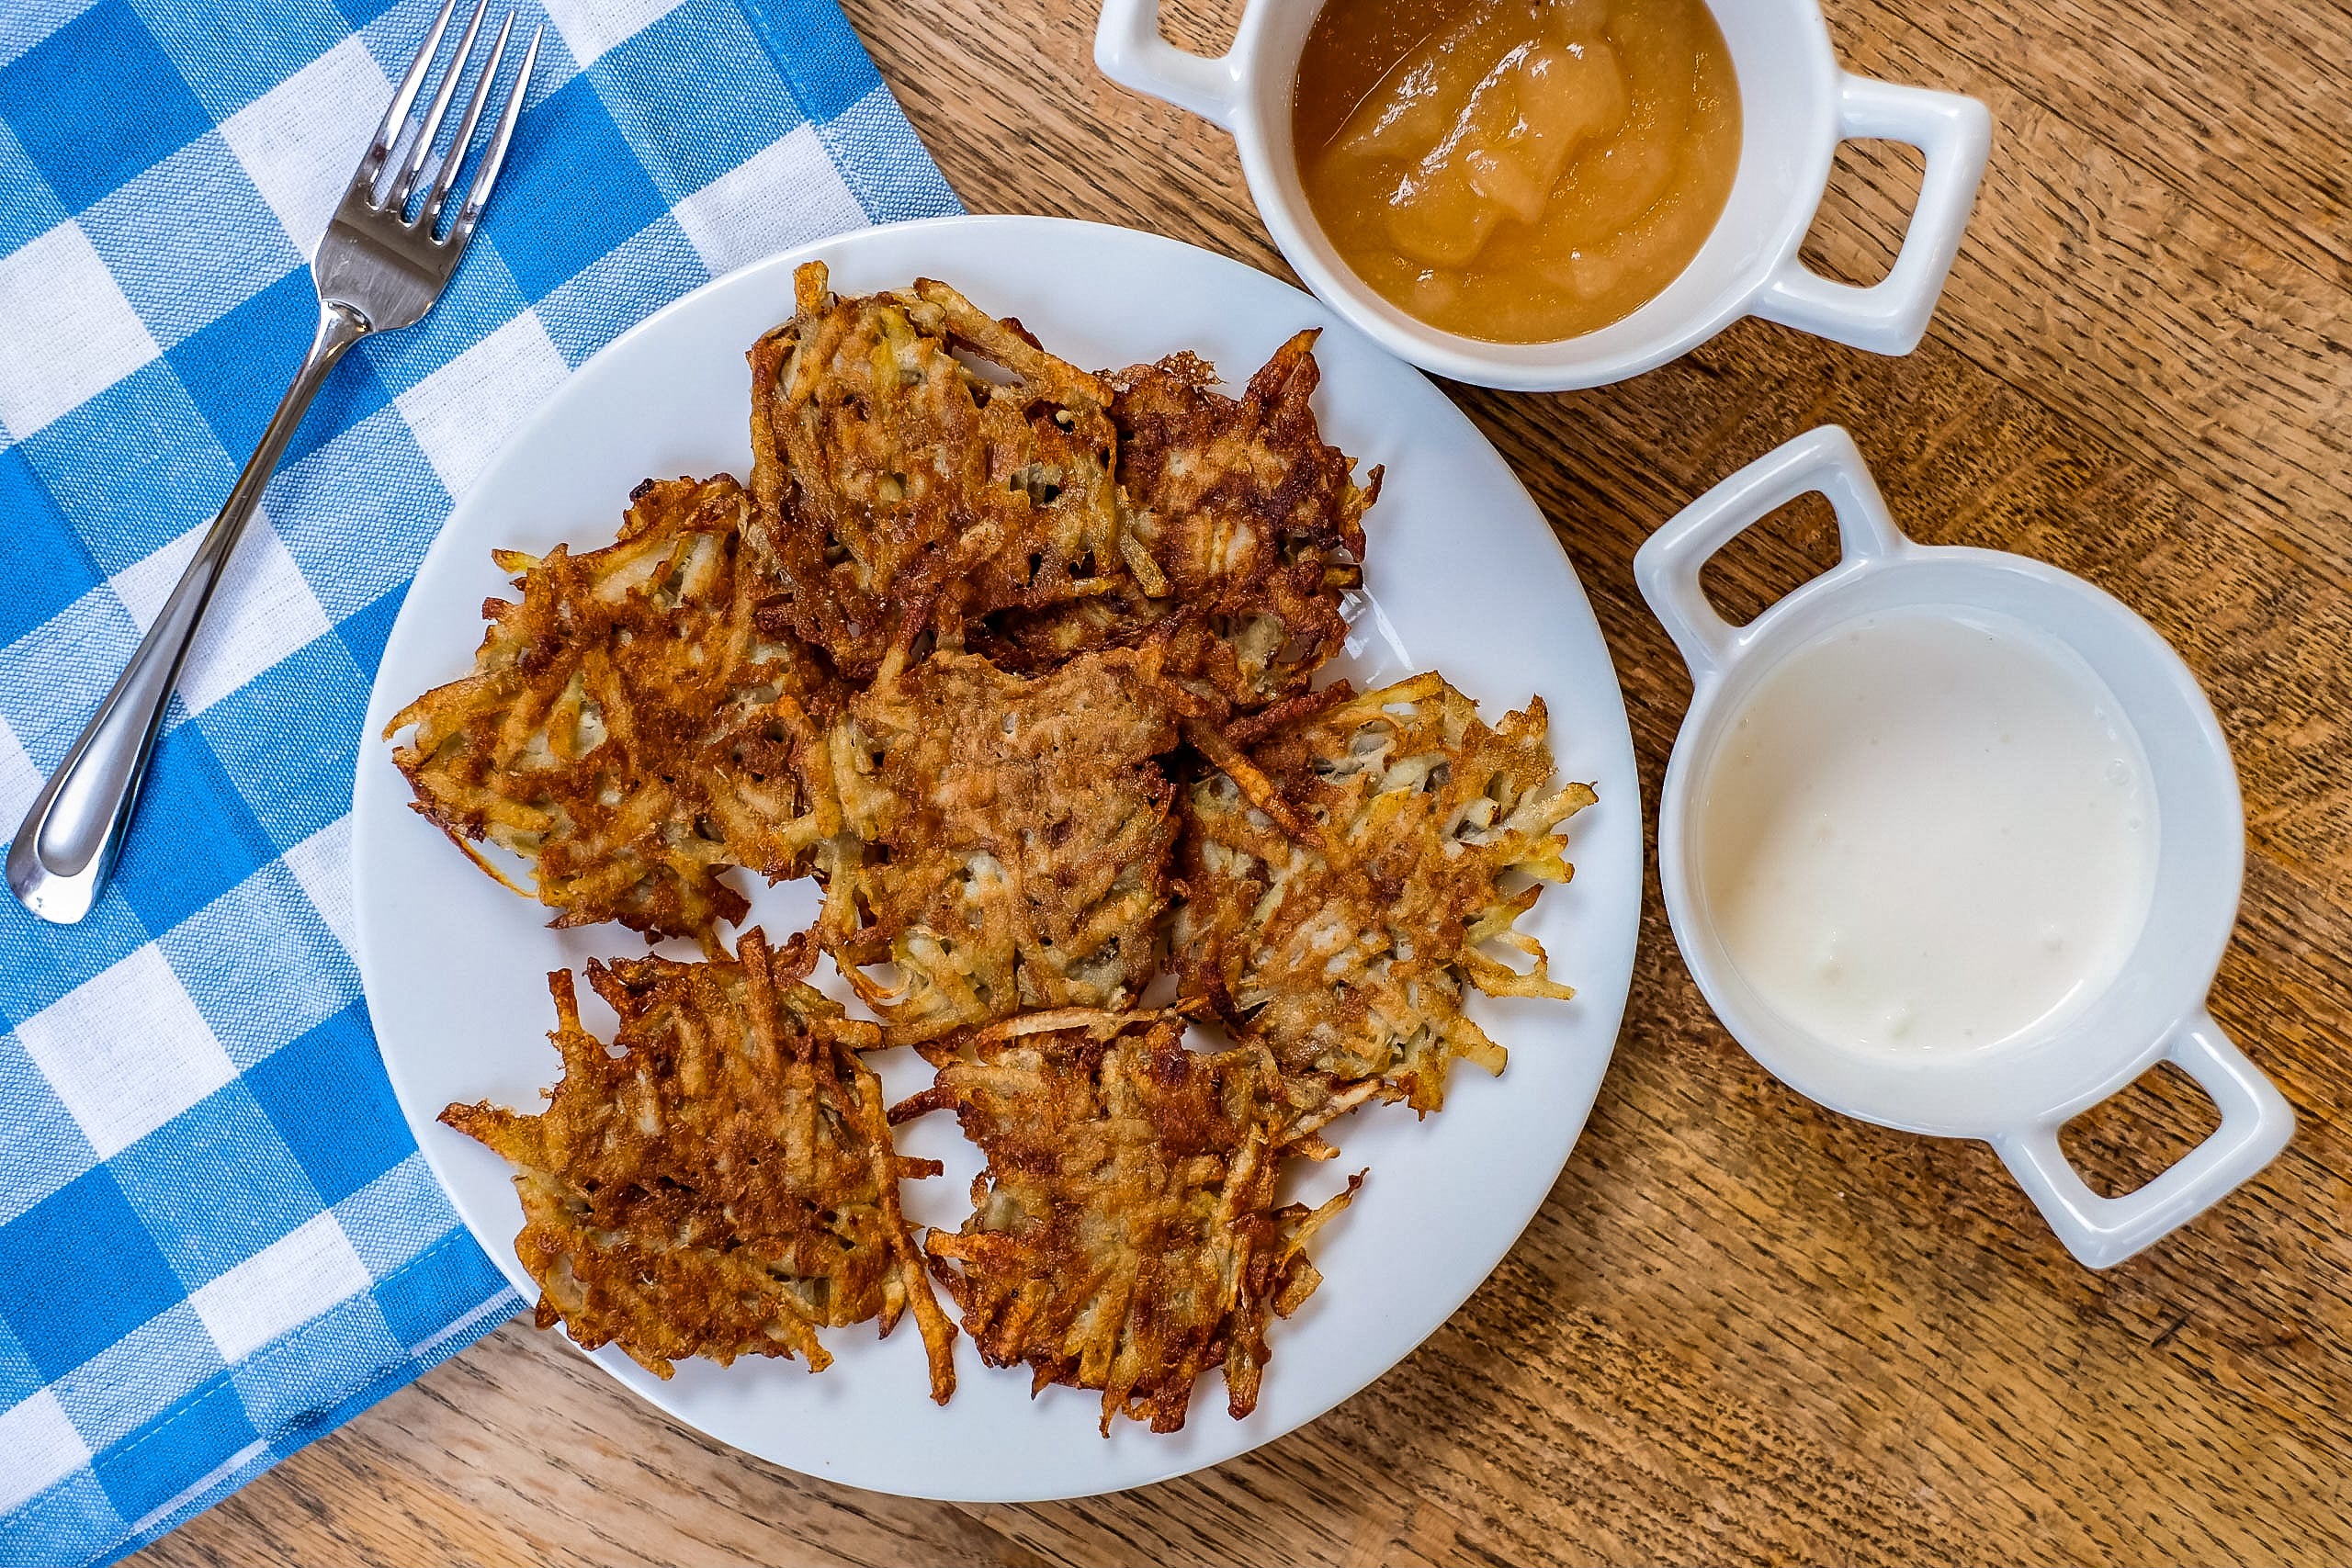 An image of Organic Potato Pancakes from Huckleberry Bakery and Café.